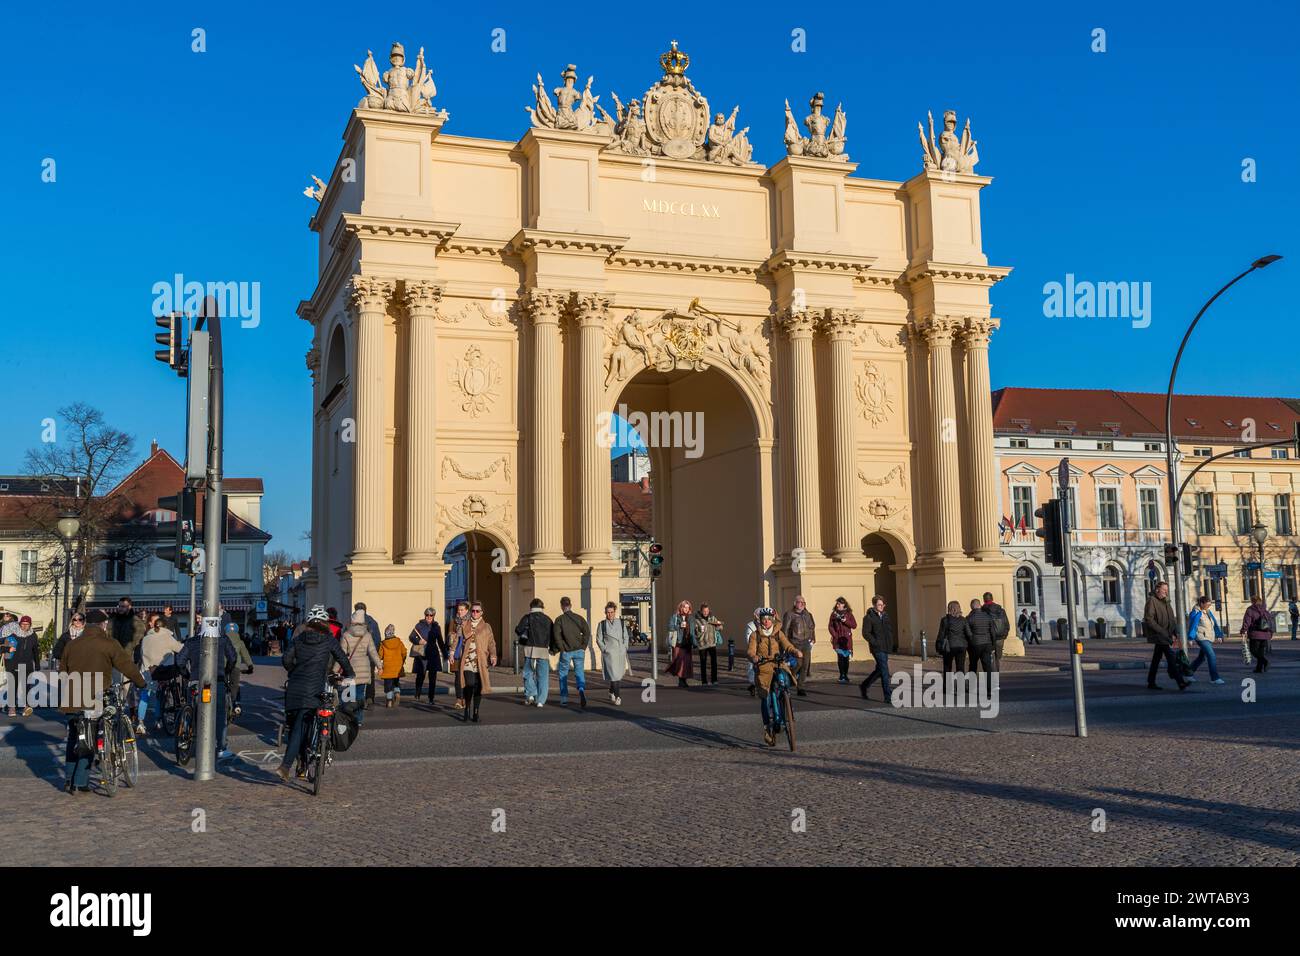 The Brandenburg Gate on Luisenplatz in Potsdam was built in 1770 and is therefore 20 years older than the famous landmark from Berlin. Brandenburg Gate, Luisenplatz, Potsdam, Brandenburg, Germany Stock Photo